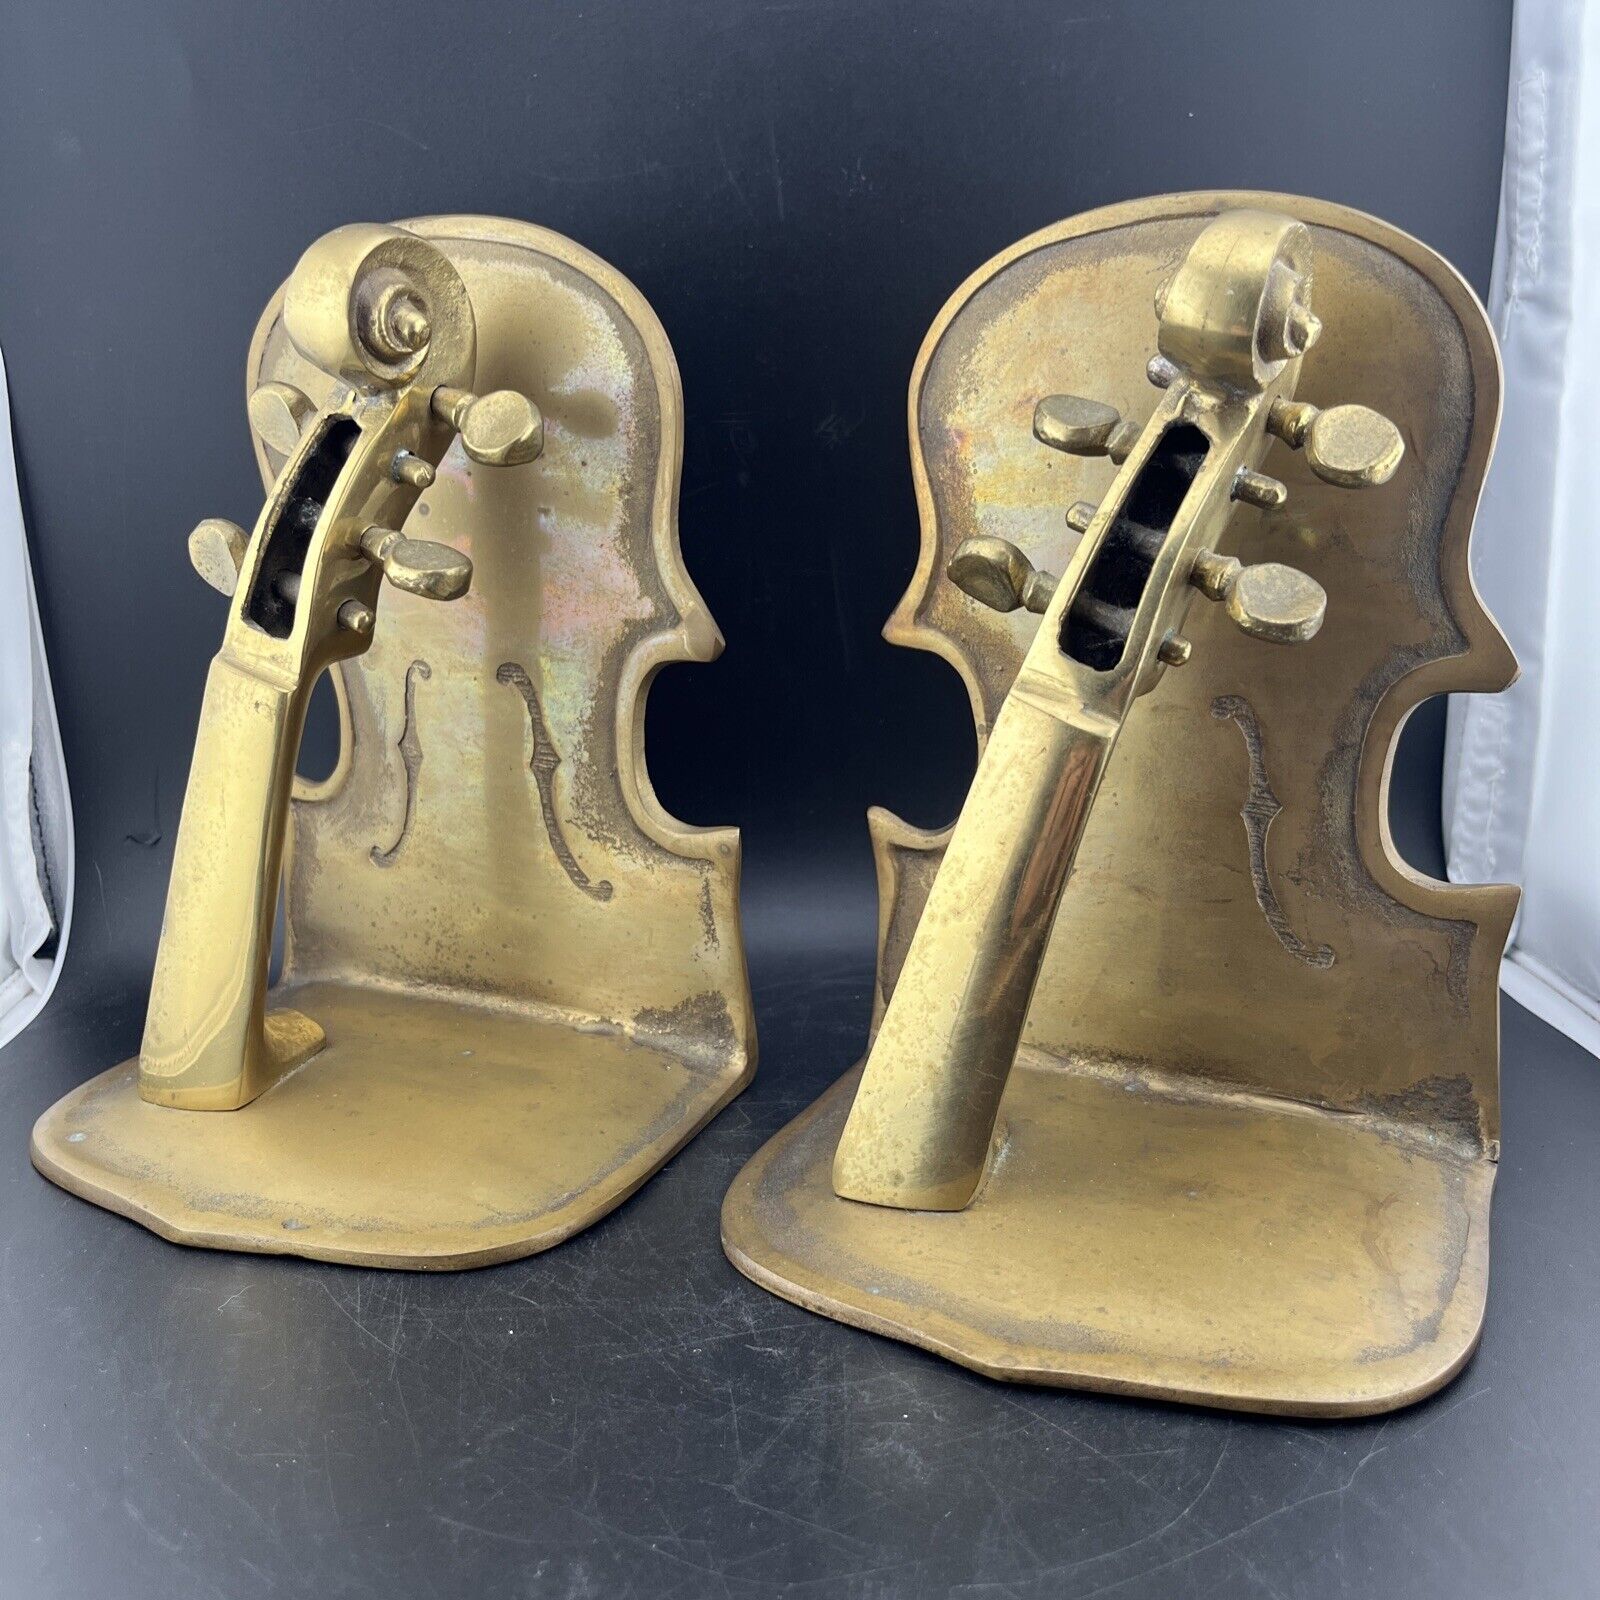 VINTAGE BRASS VIOLIN OR BASS OR CELLO  SET OF BOOKENDS MUSICAL INSTRUMENT